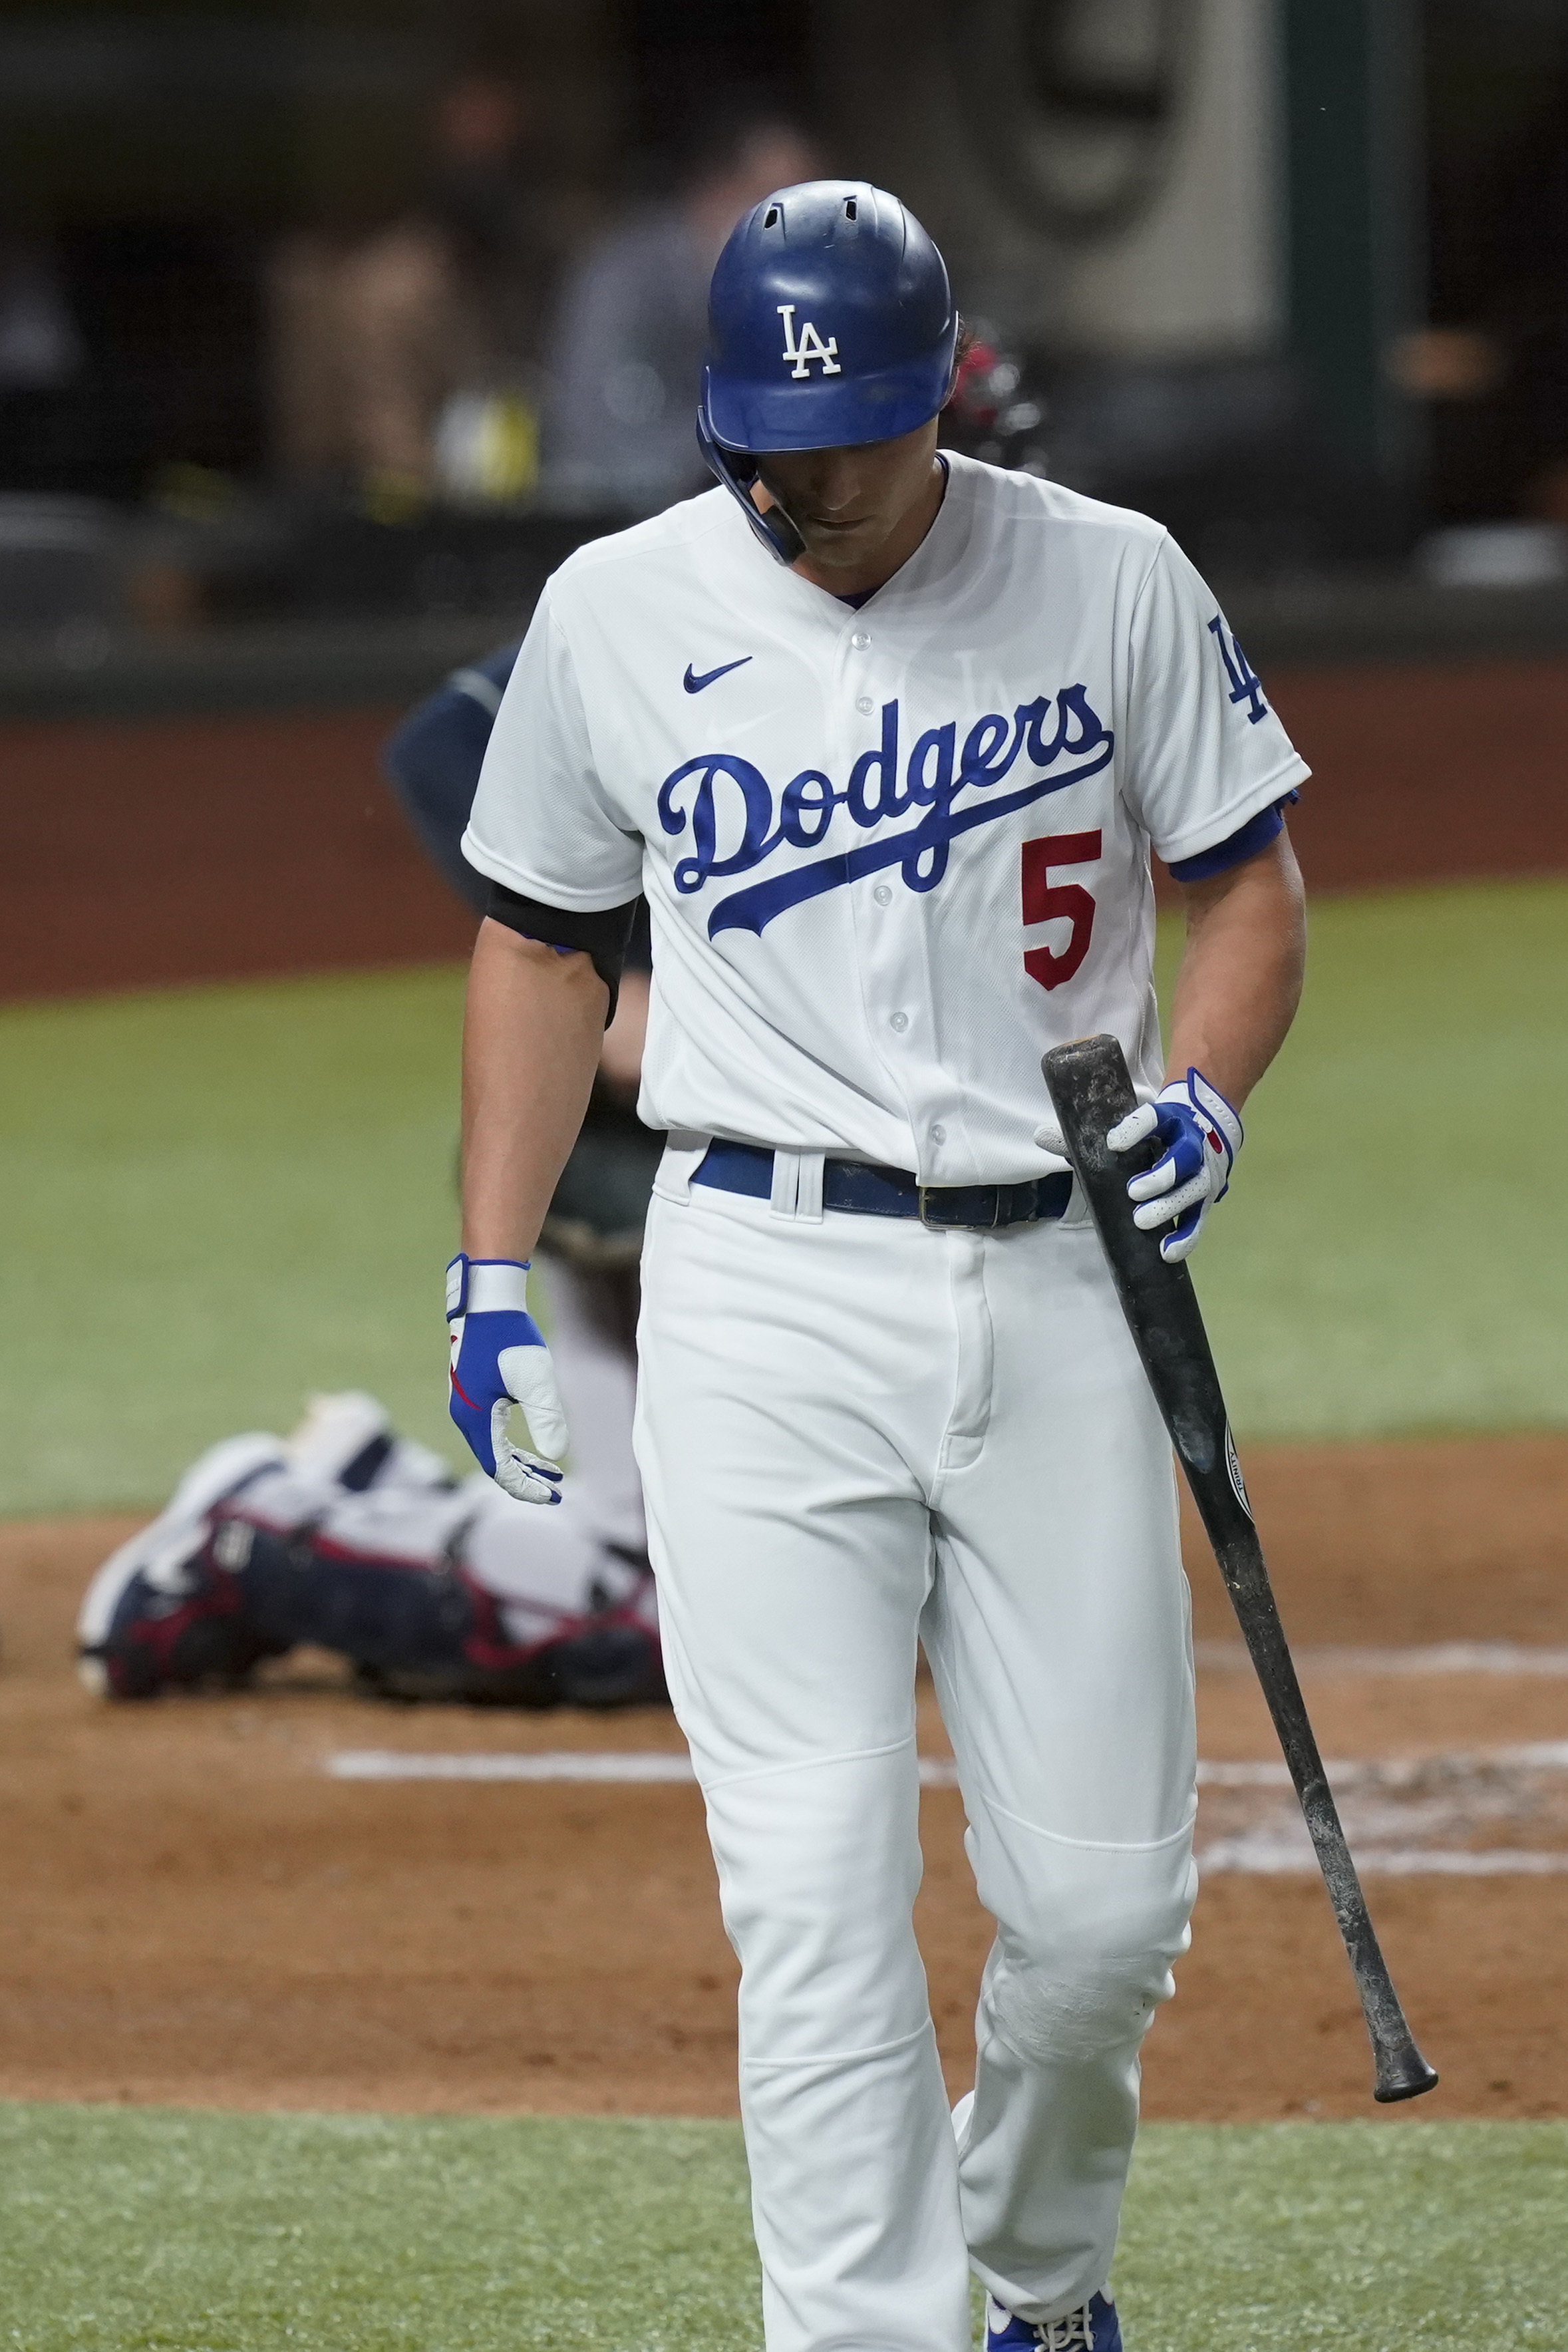 Riley HR in 9th leads Braves past Dodgers 5-1 in NLCS opener